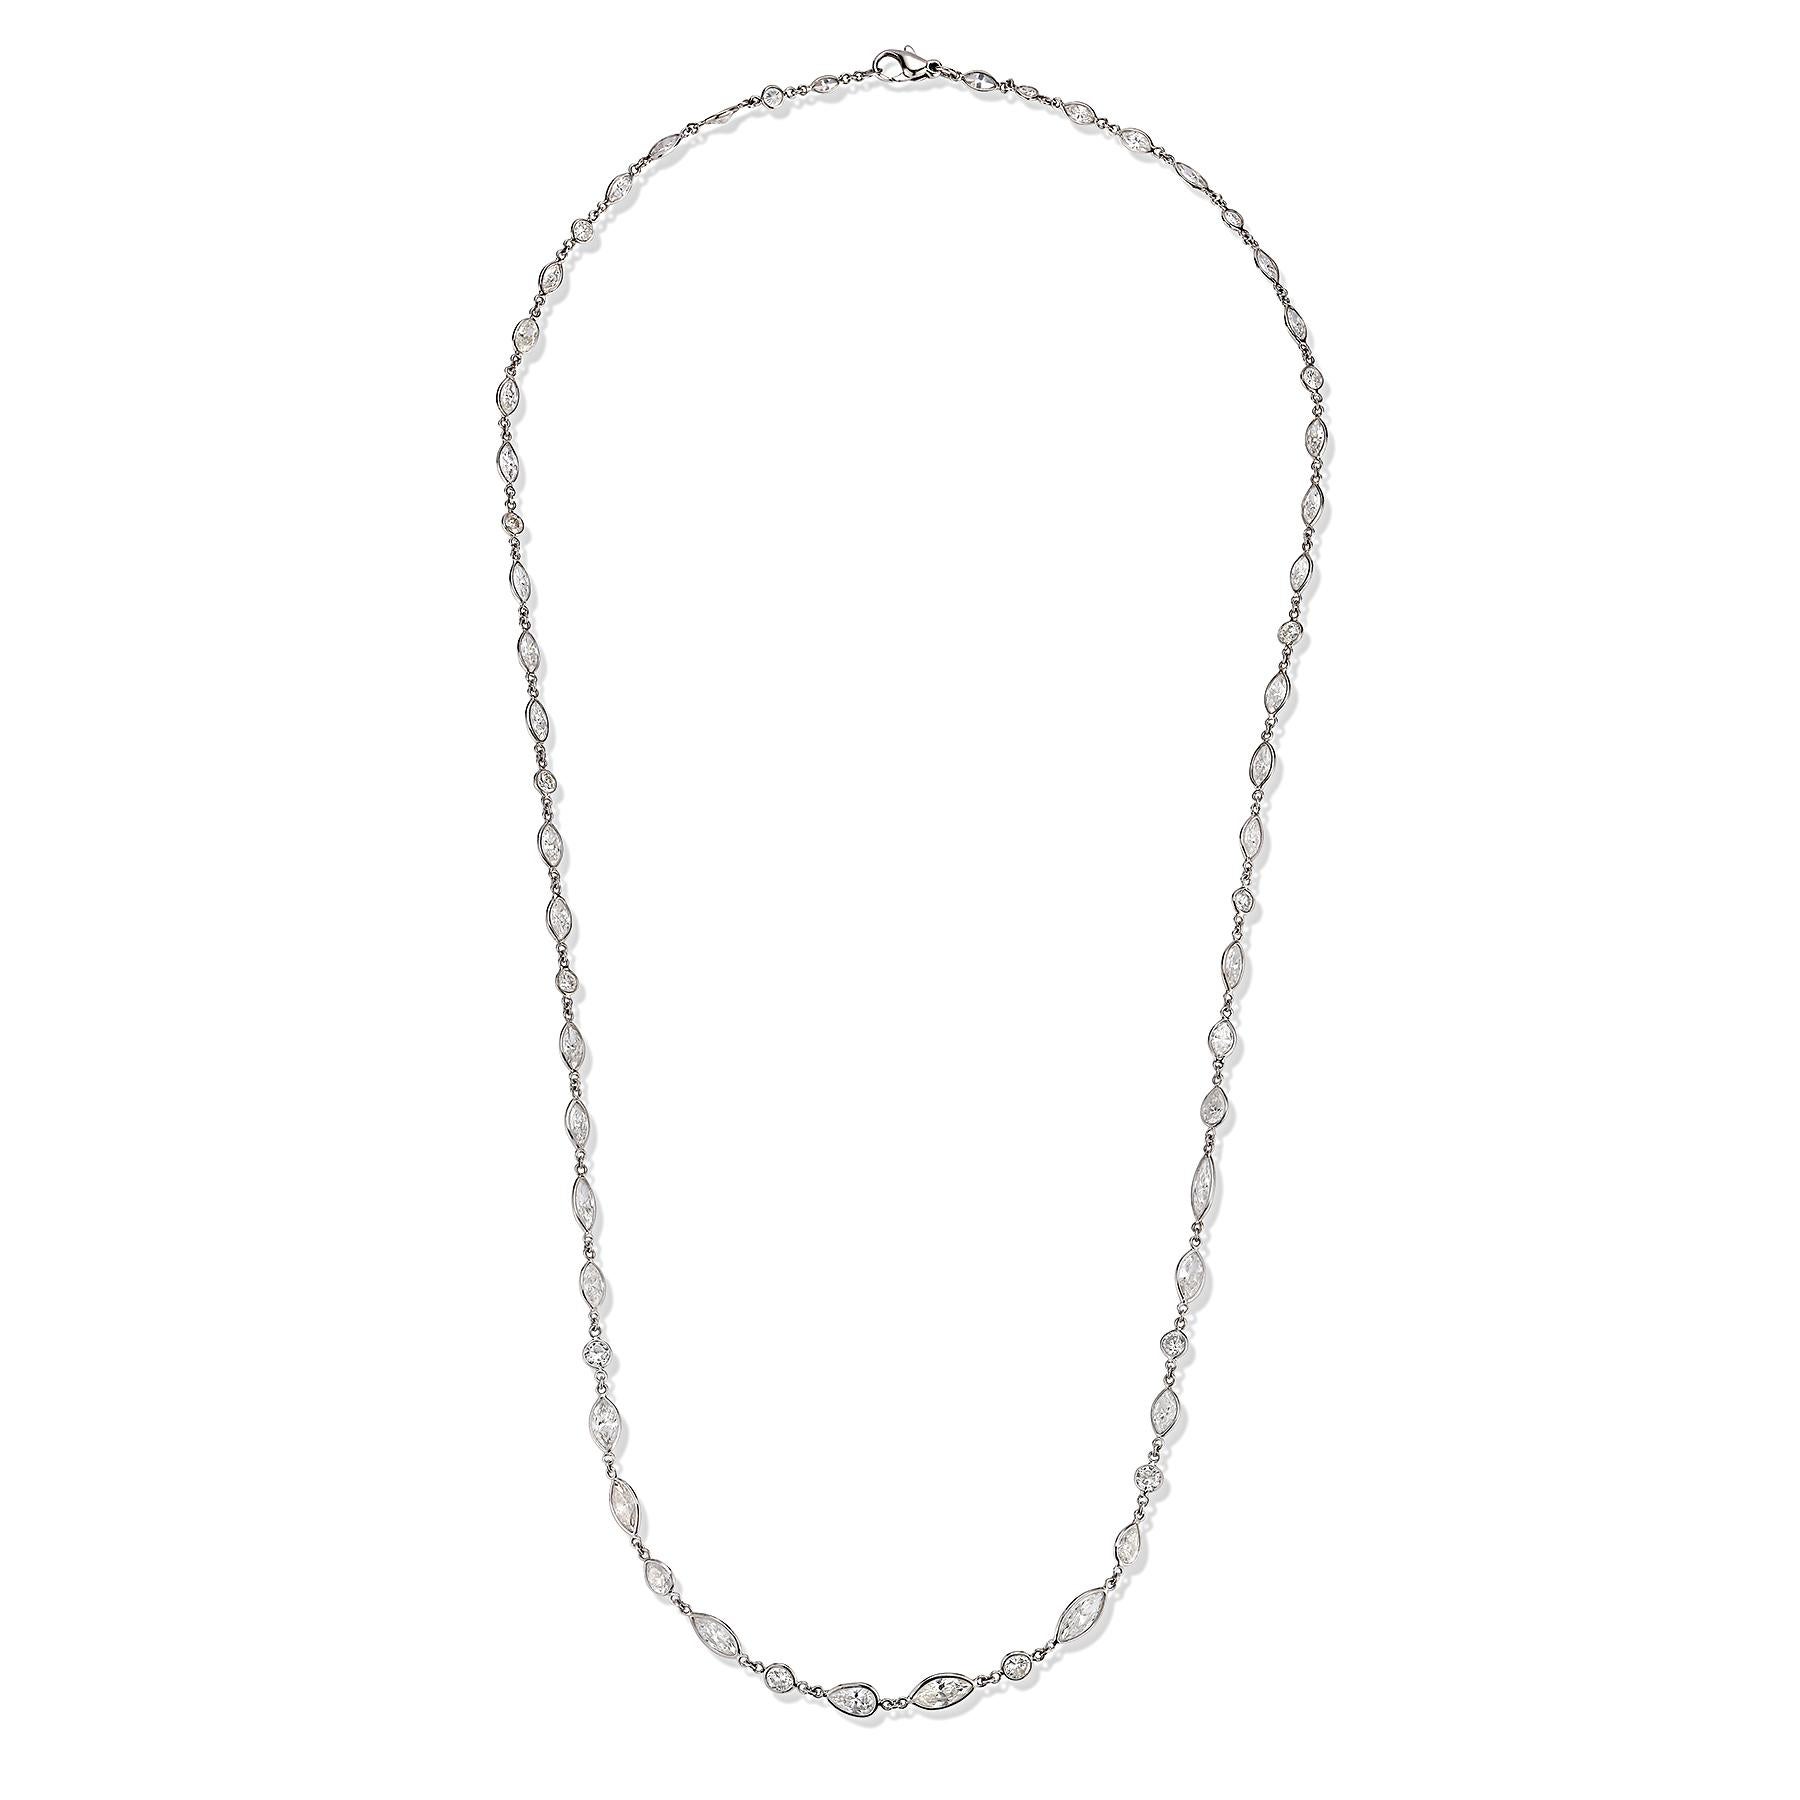 Marquise & Round Cut Diamond Long Chain Necklace

Marquise & round cut diamonds linked together forming a long necklace.

Total Diamond Weight: 22.60 cts 

Measurements: 27.5